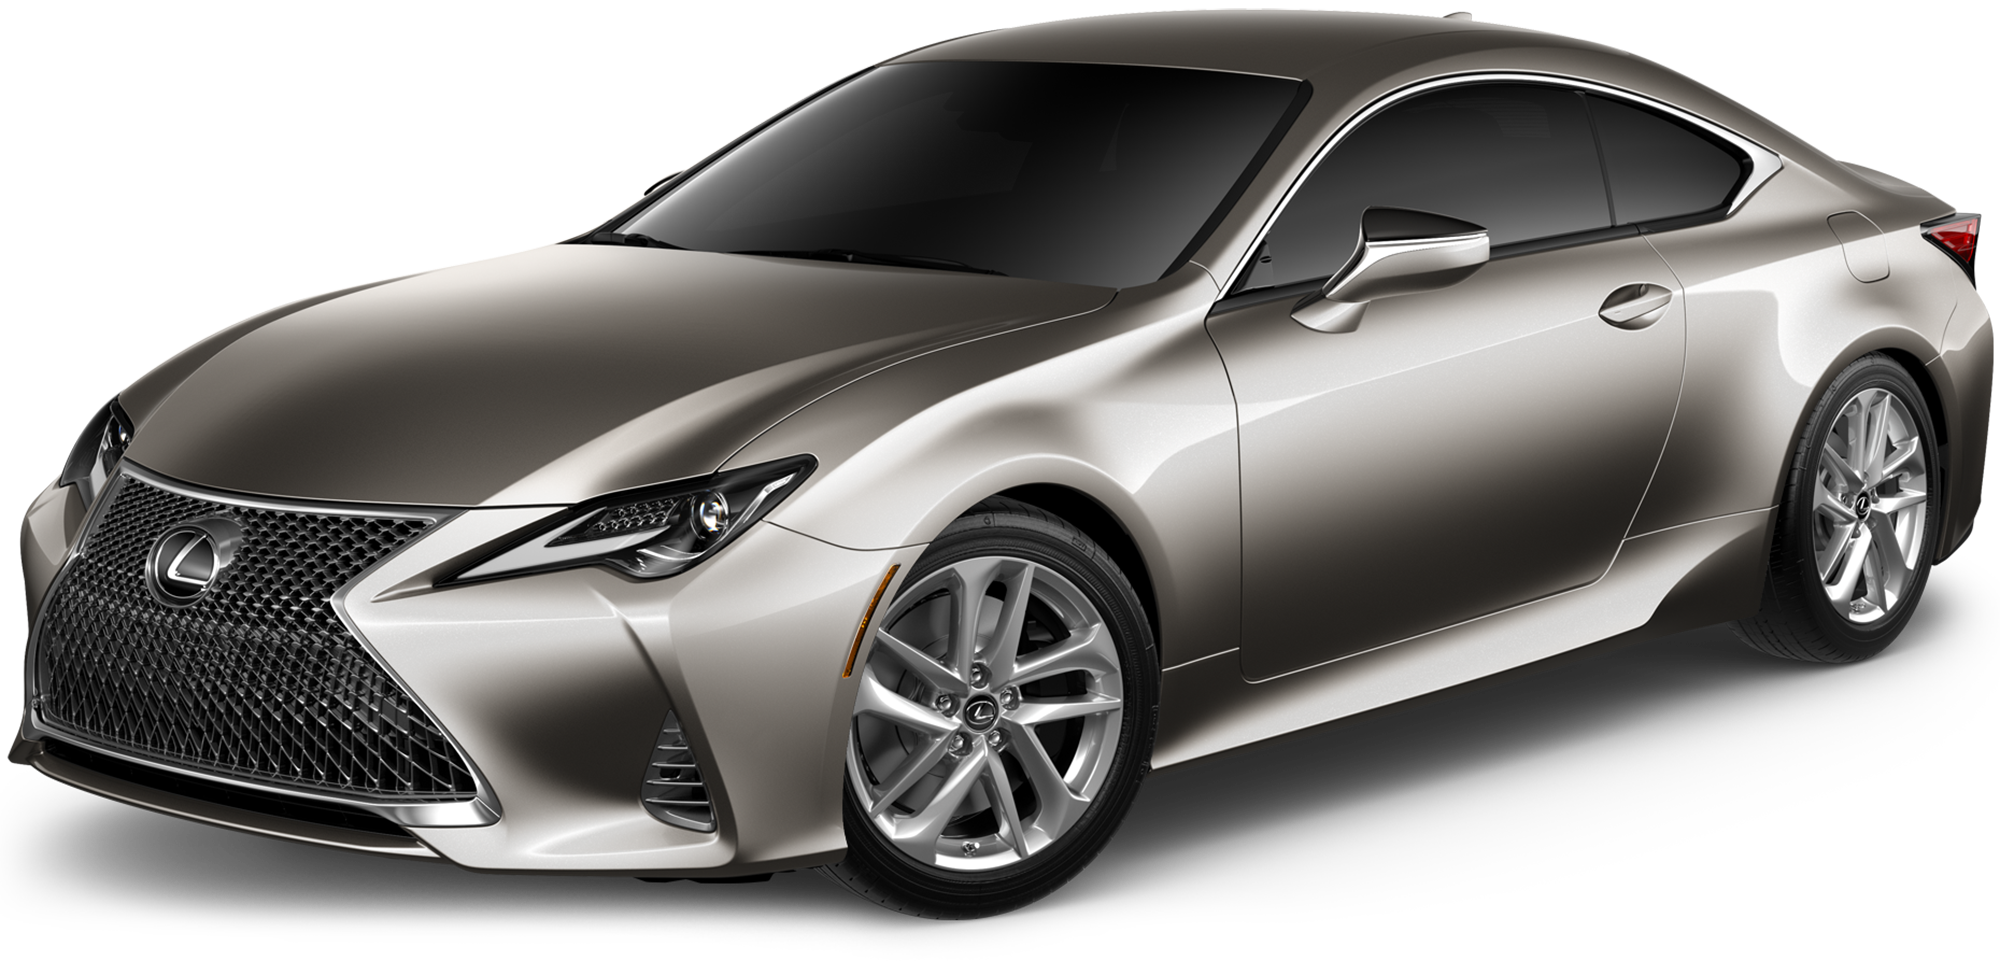 2021 Lexus Rc 300 Incentives Specials Offers In Raleigh Nc At Johnson Lexus